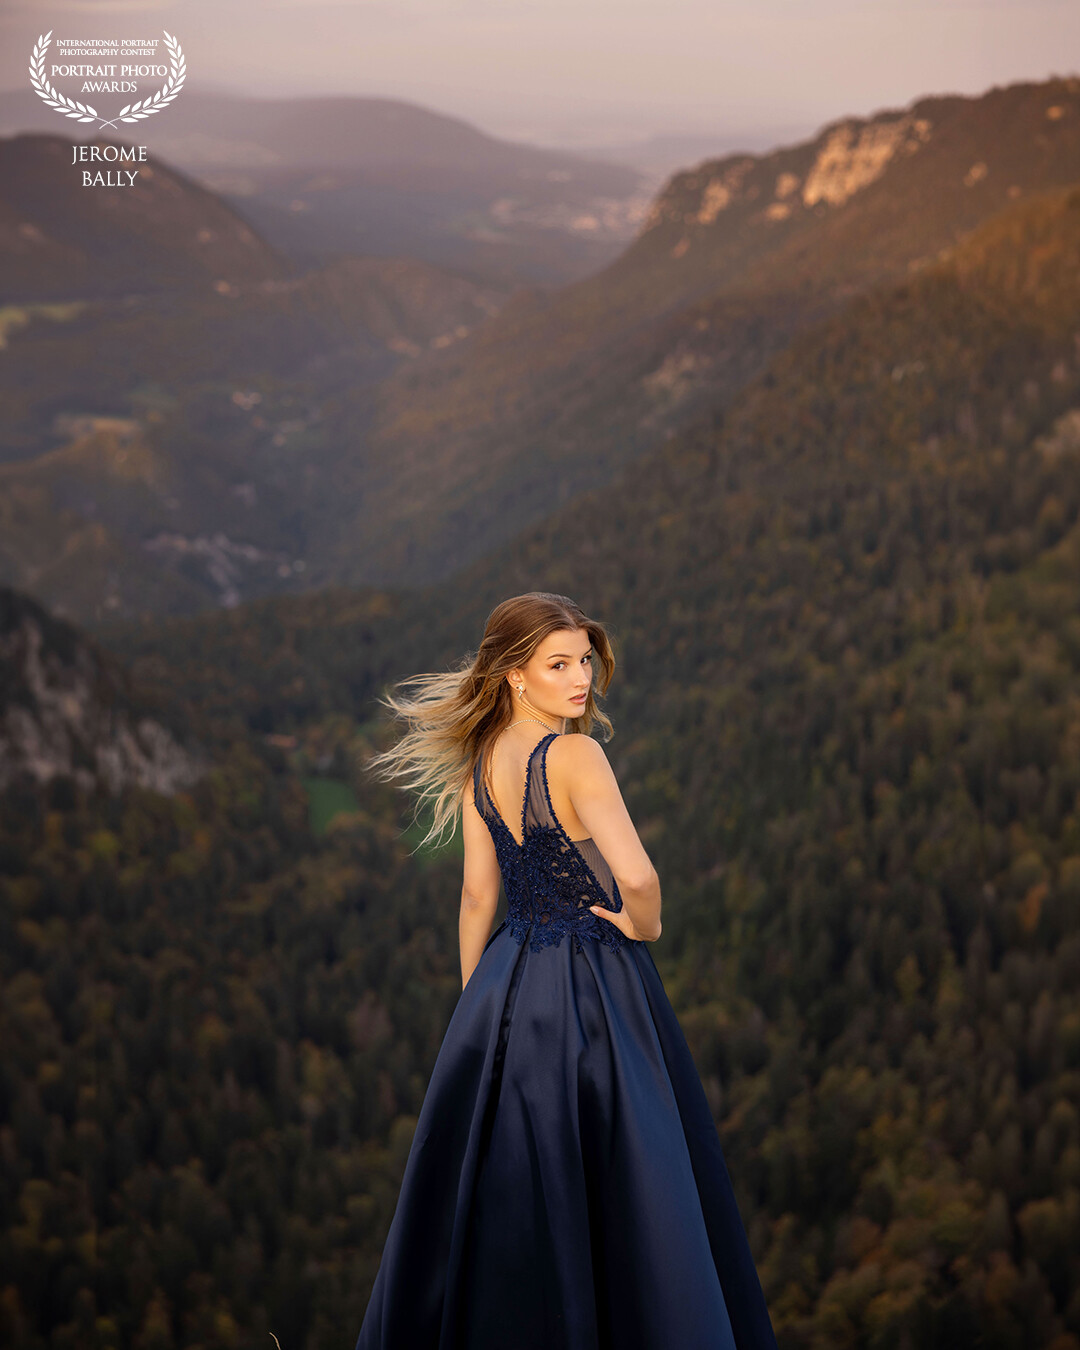 What a sunset! we decided to have a shooting day with Carlota (@teencarlo) and end it in the evening at the well known Swiss viewpoint (Creux du Van). The color of the sun, combined with a very beautiful model in a marvelous dress is simple stunning to me.